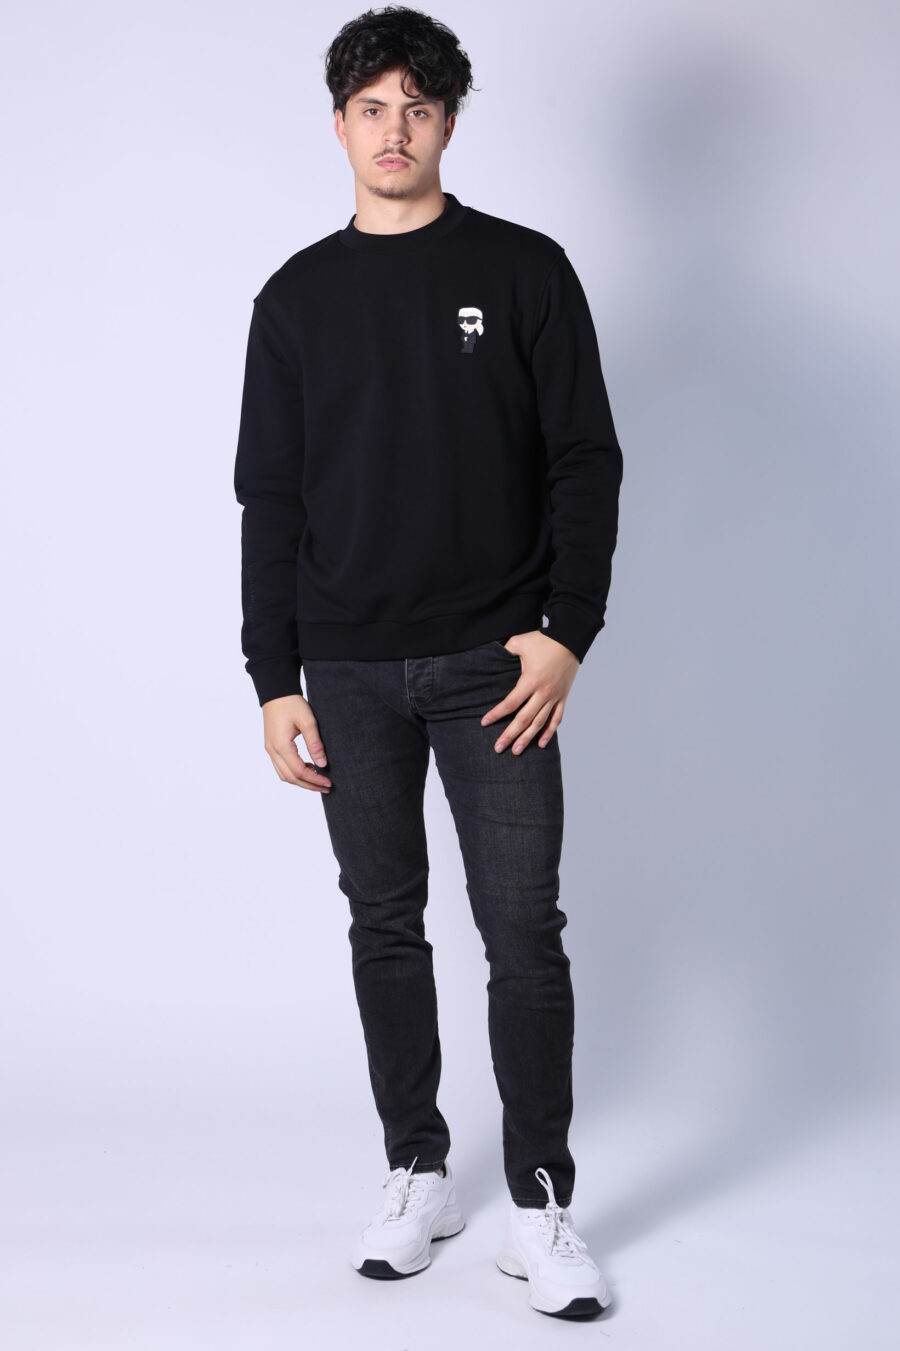 Black sweatshirt with embroidered minilogue - Untitled Catalog 05763